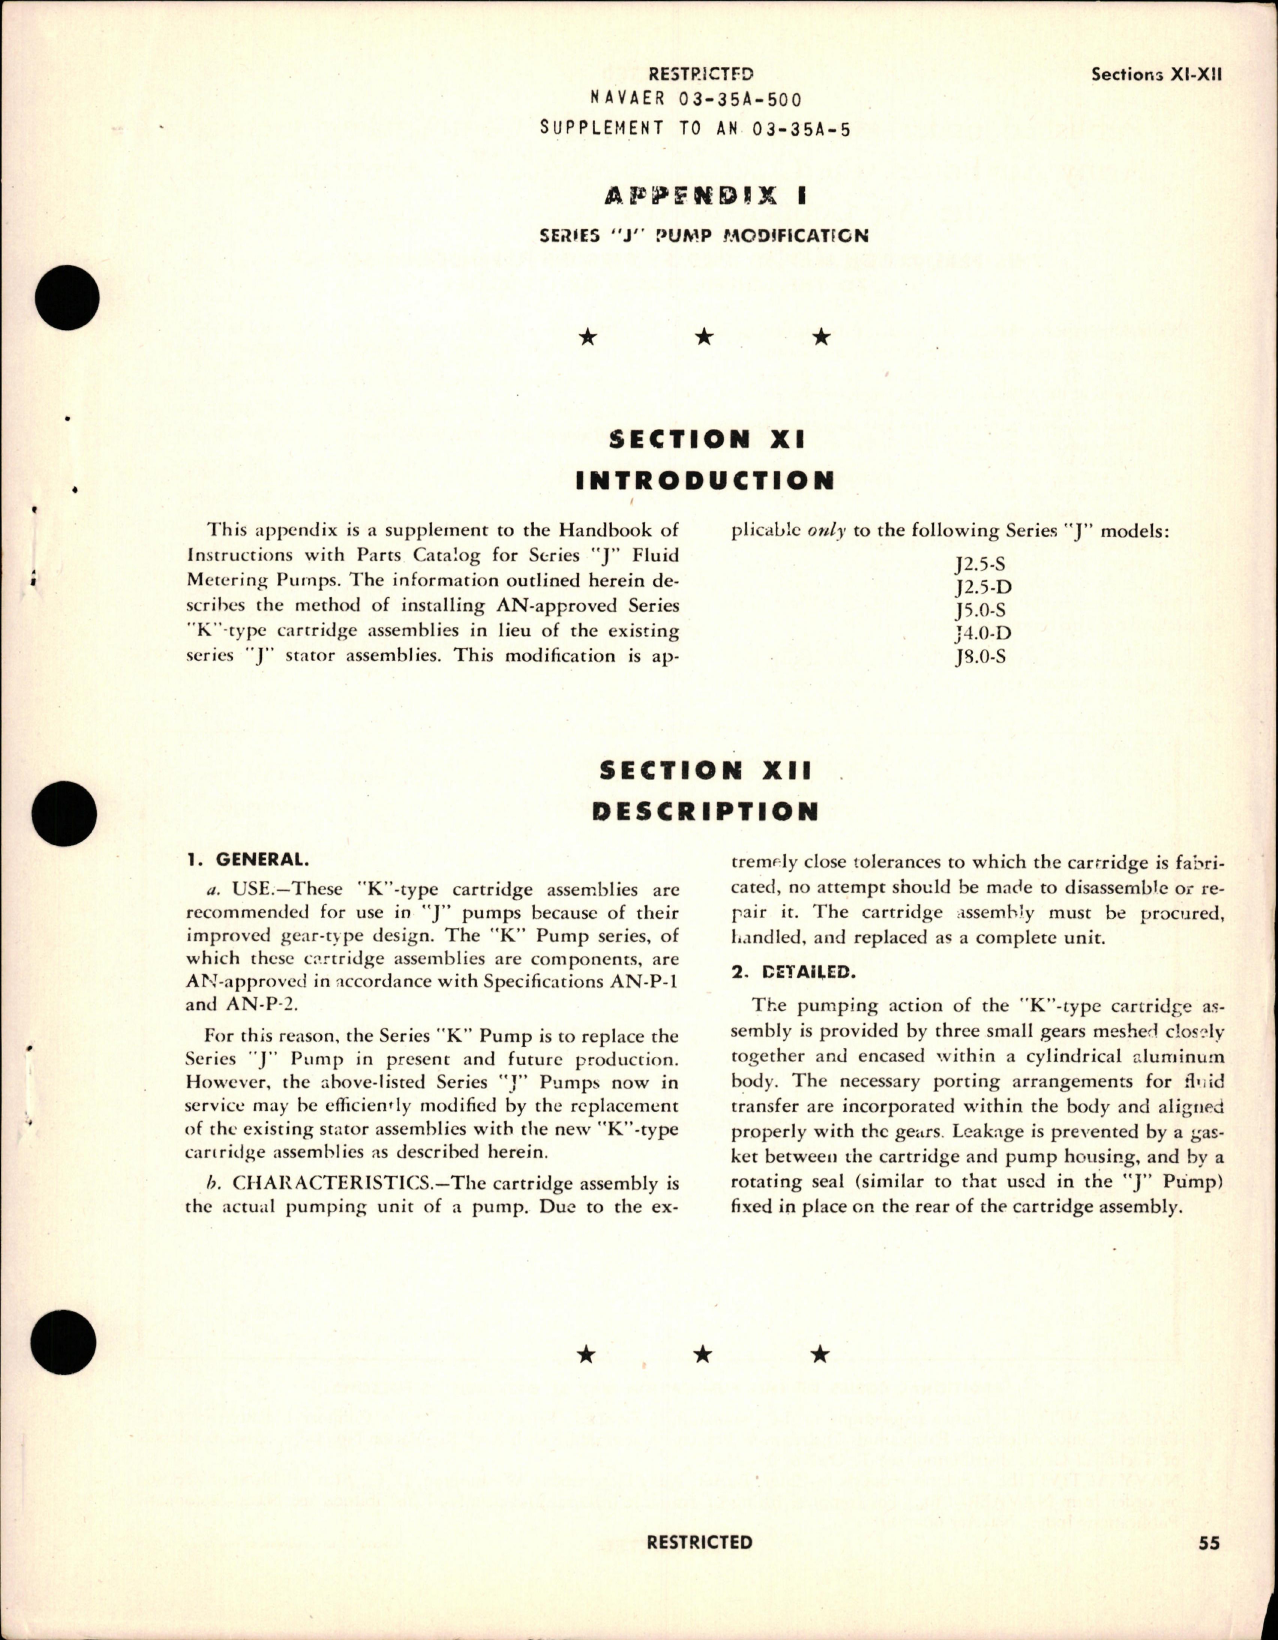 Sample page 5 from AirCorps Library document: Supplement to Instructions with Parts Catalog for Modification of Series J Fluid Metering Pumps